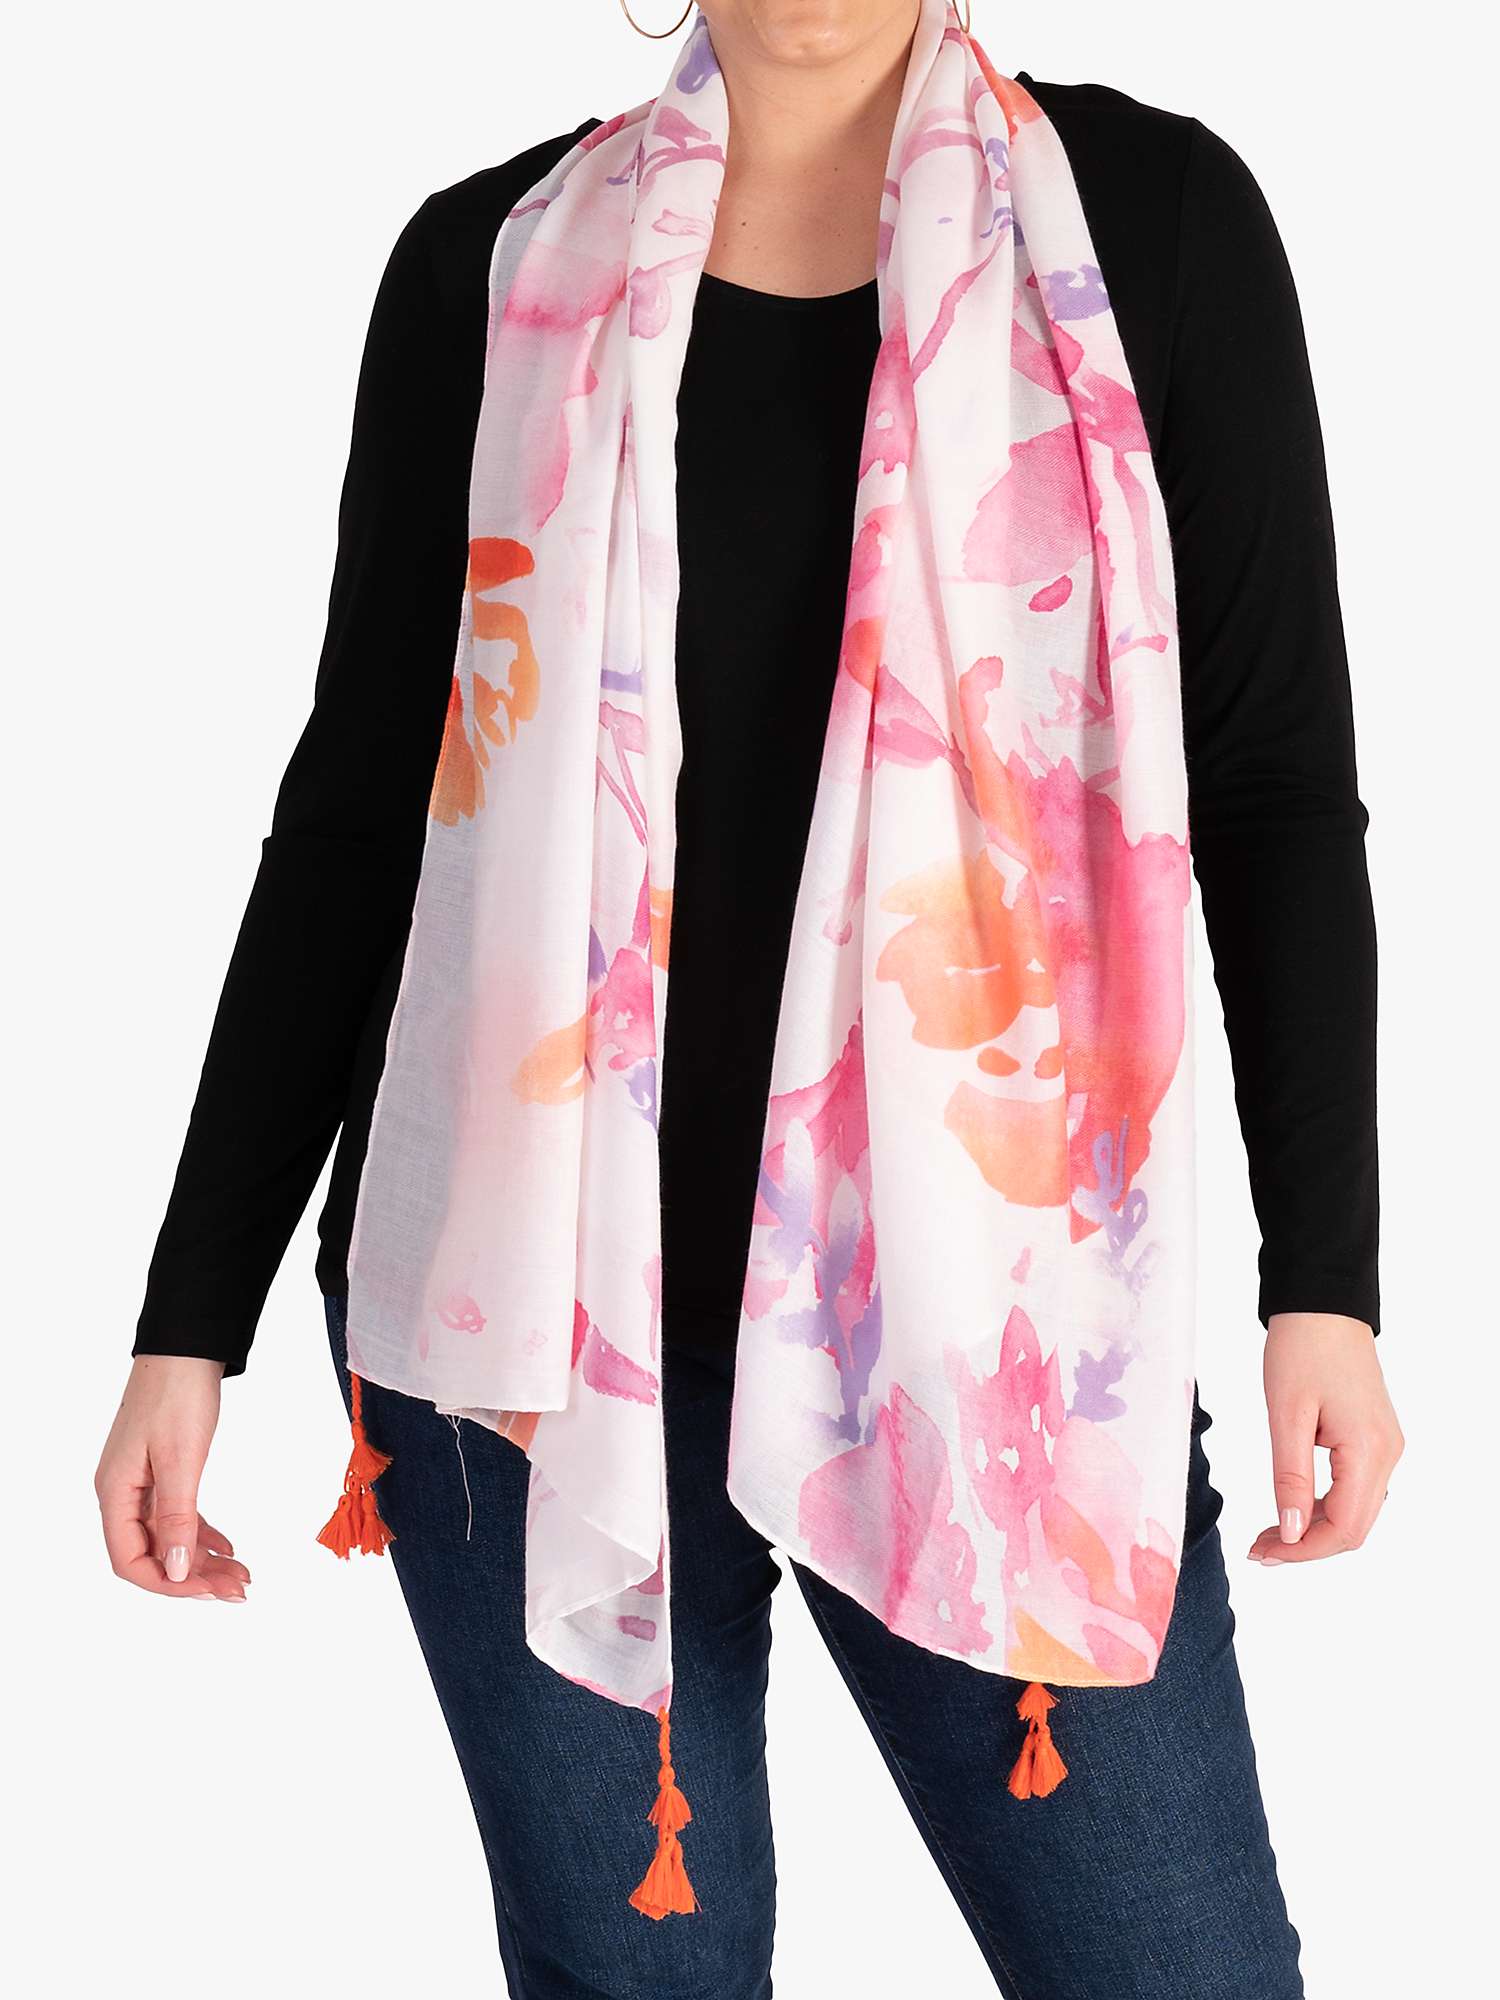 Buy chesca Watercolour Flower Scarf, Pink/Tangerine Online at johnlewis.com